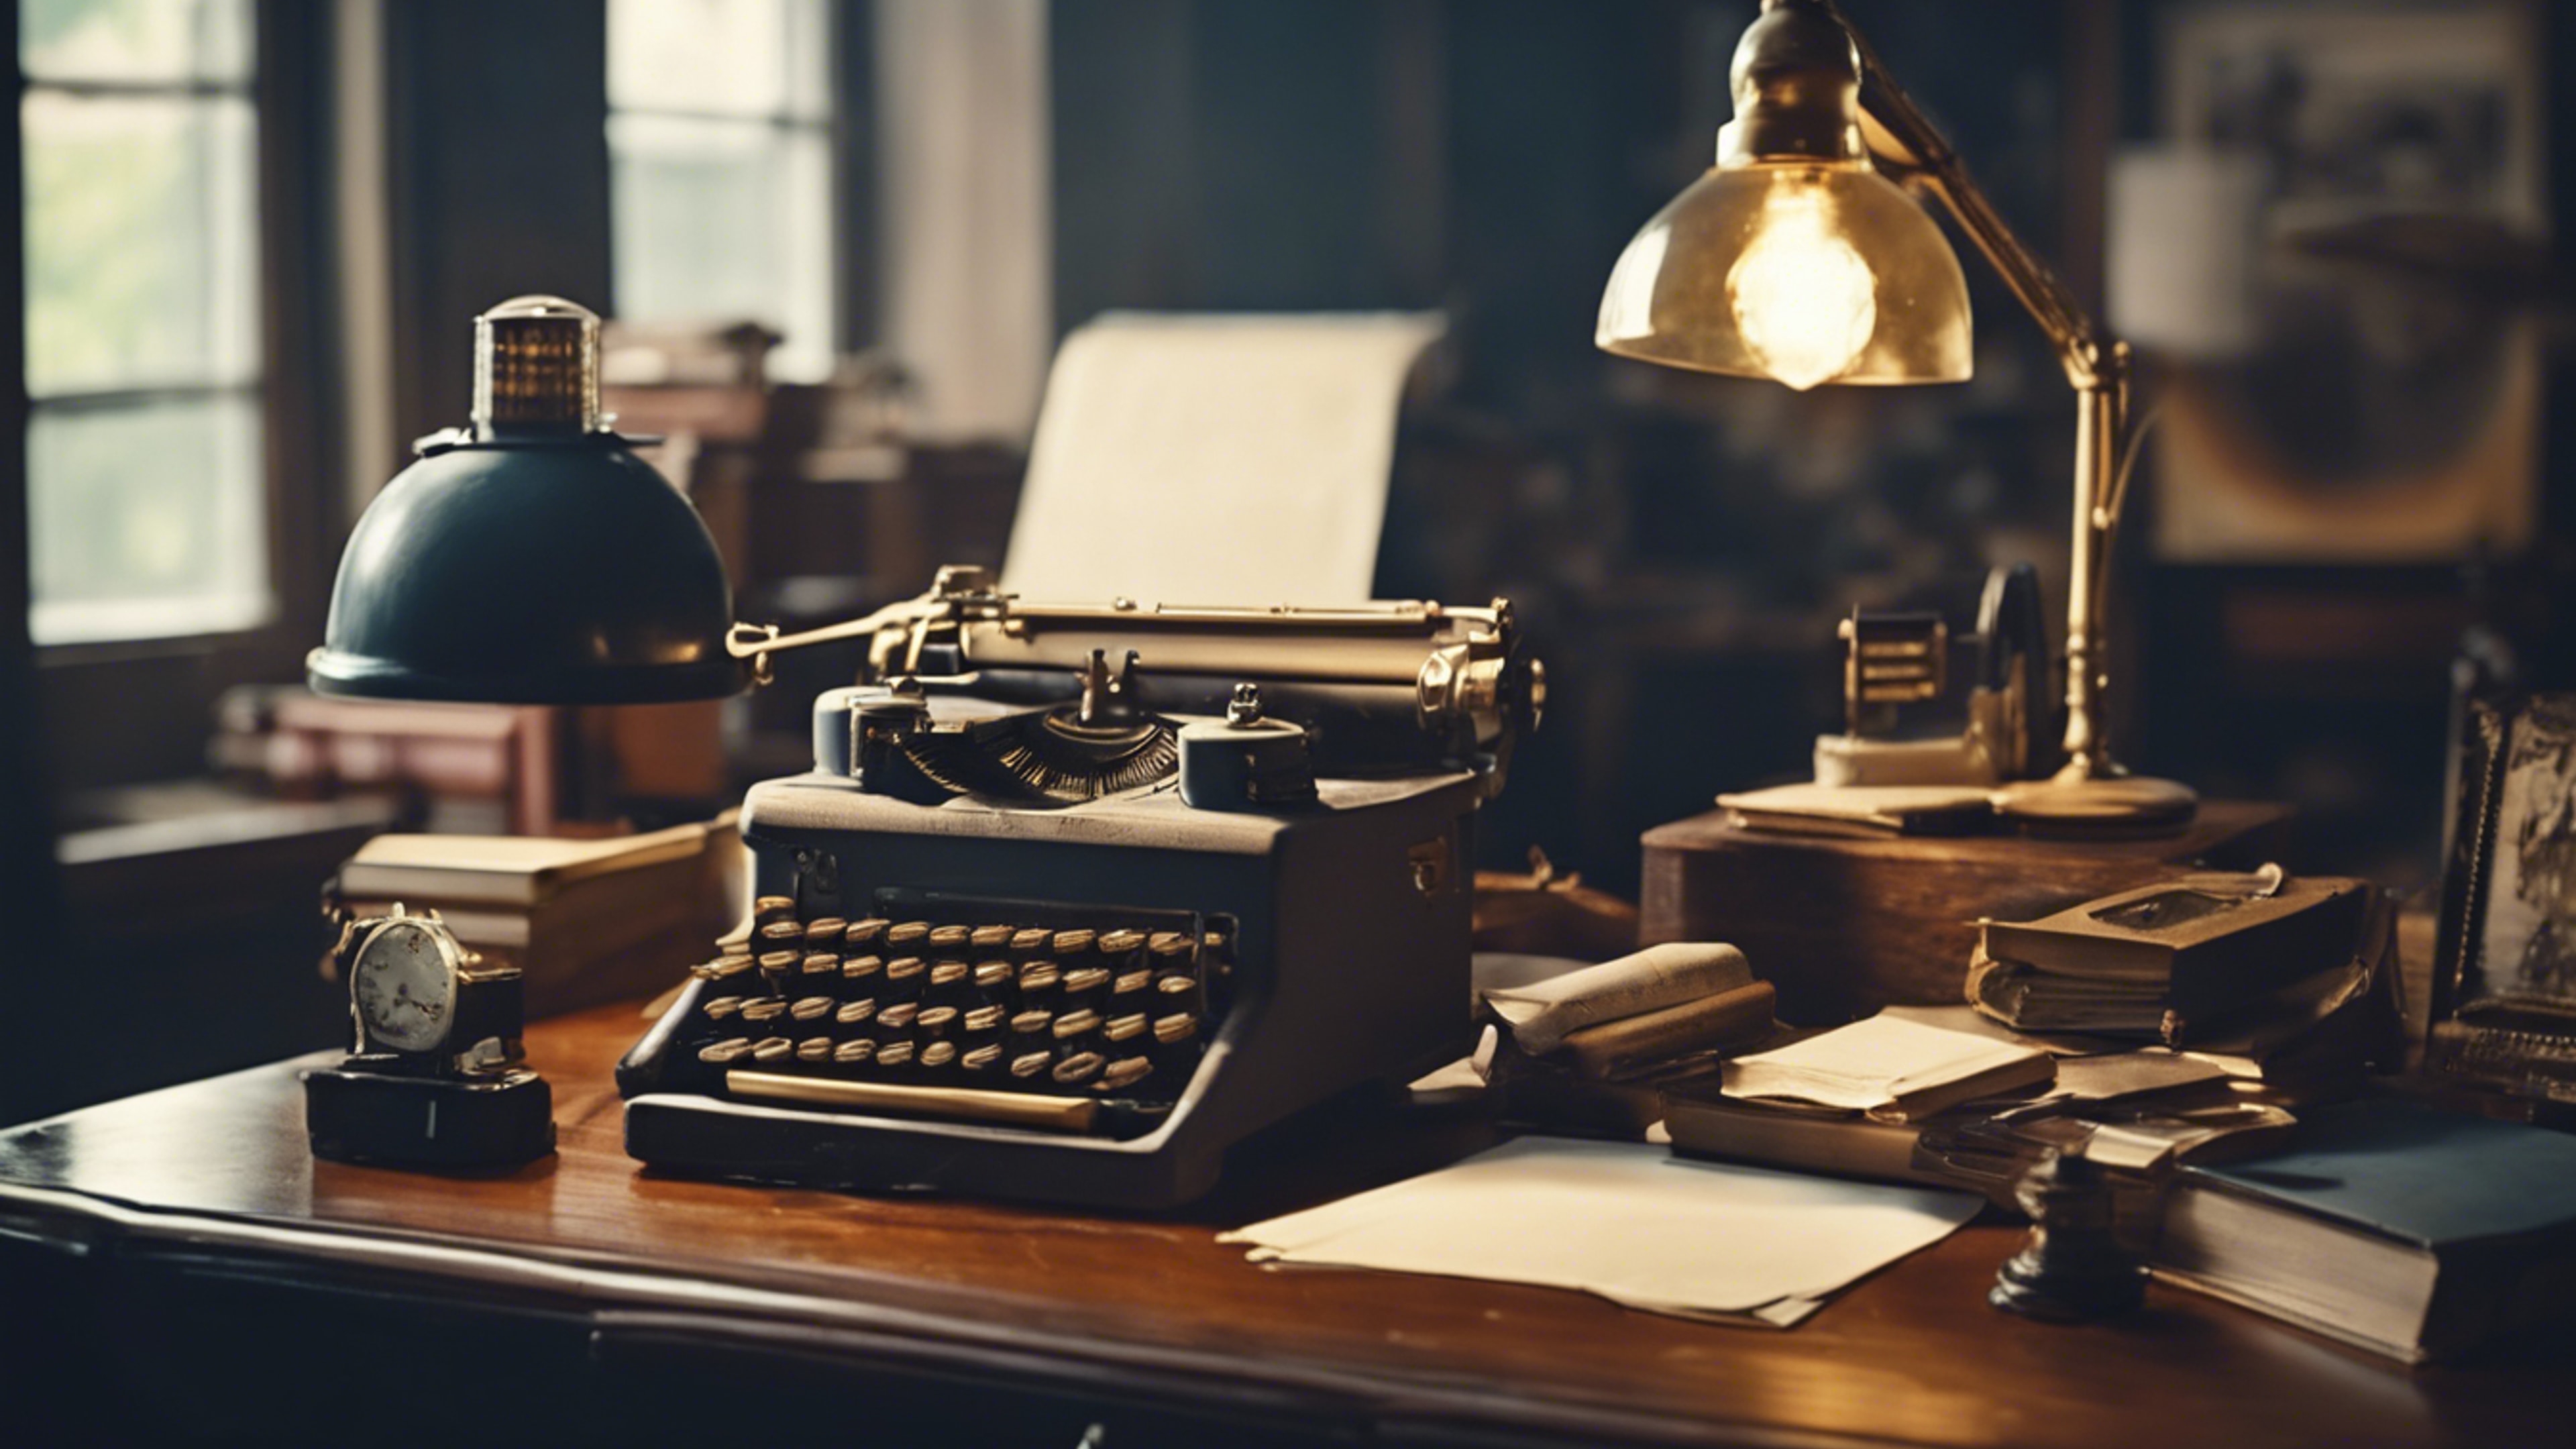 An old-fashioned navy office with a wooden desk, a typwriter and a vintage lamp. Ფონი[8cb58867731e4823a50e]